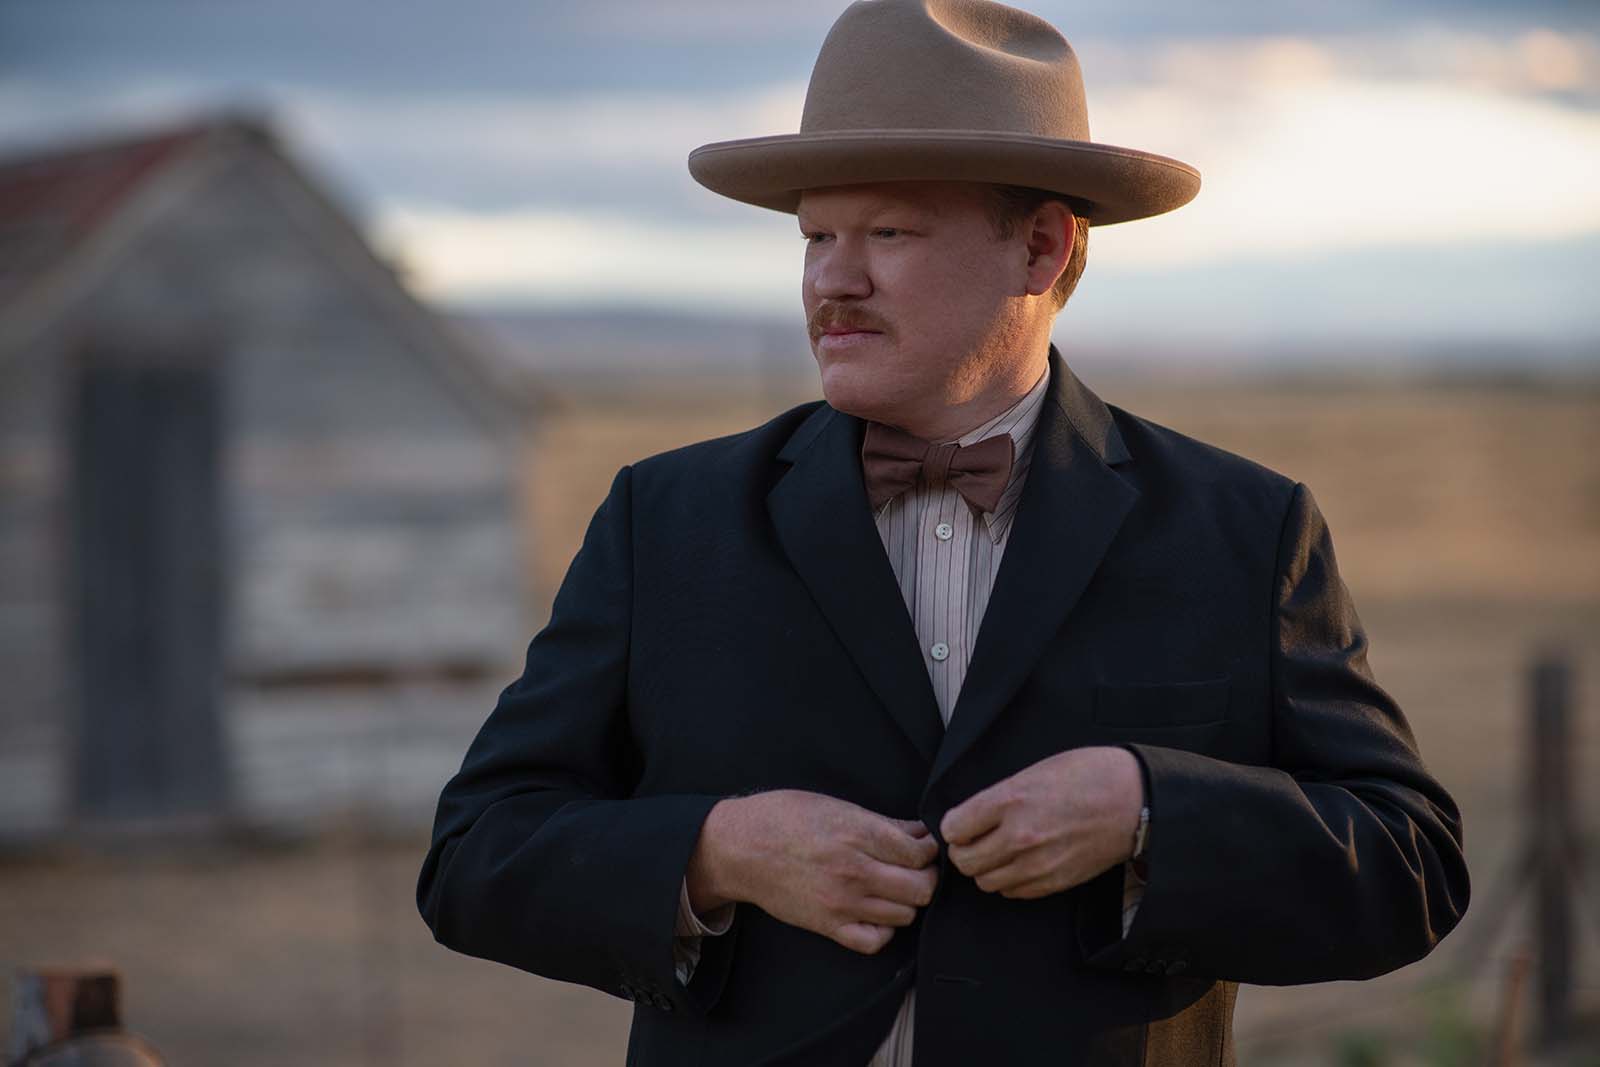 Jesse Plemons as George in The Power of the Dog. Image © Netflix